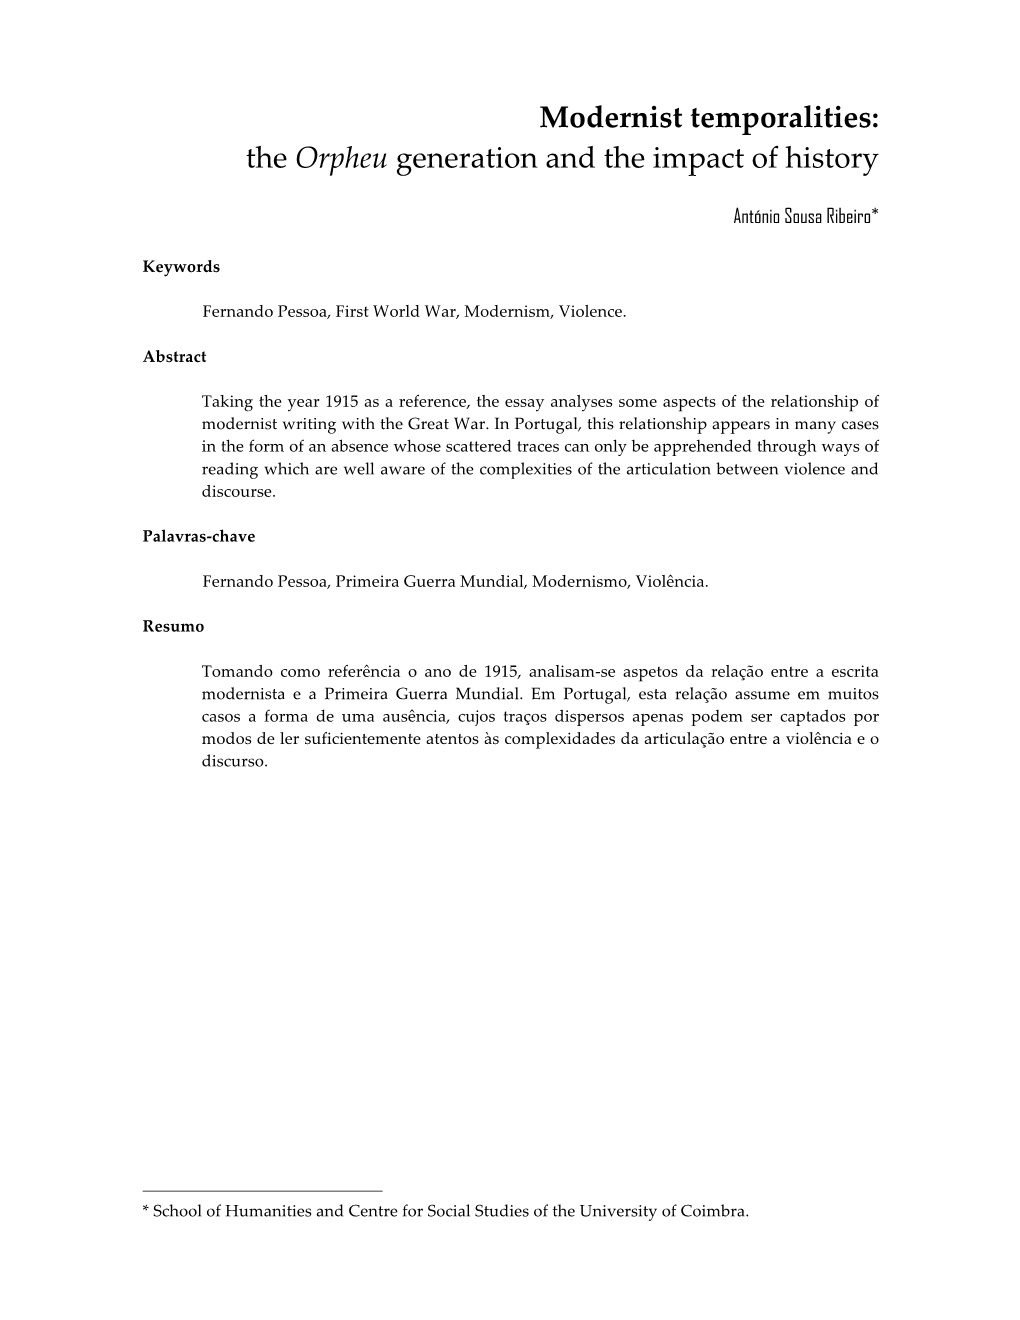 Modernist Temporalities: the Orpheu Generation and the Impact of History